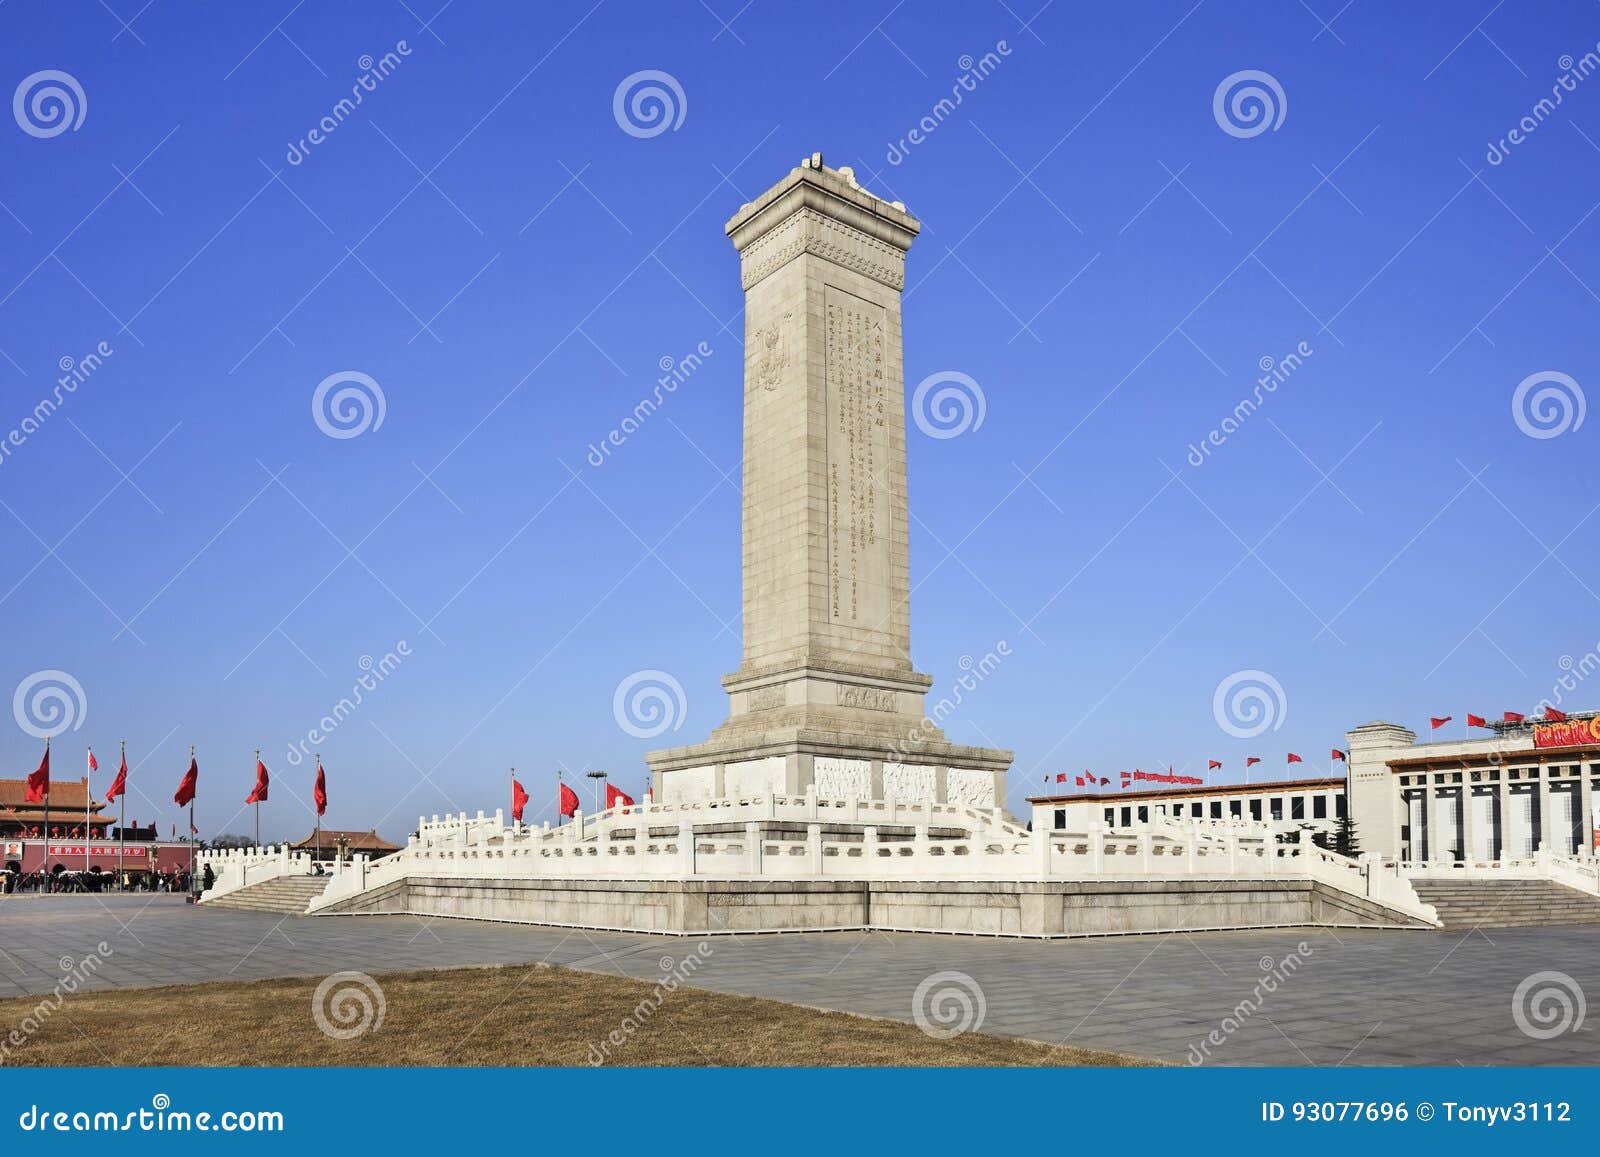 commemoration monument at the tiananmen square, beijing, china